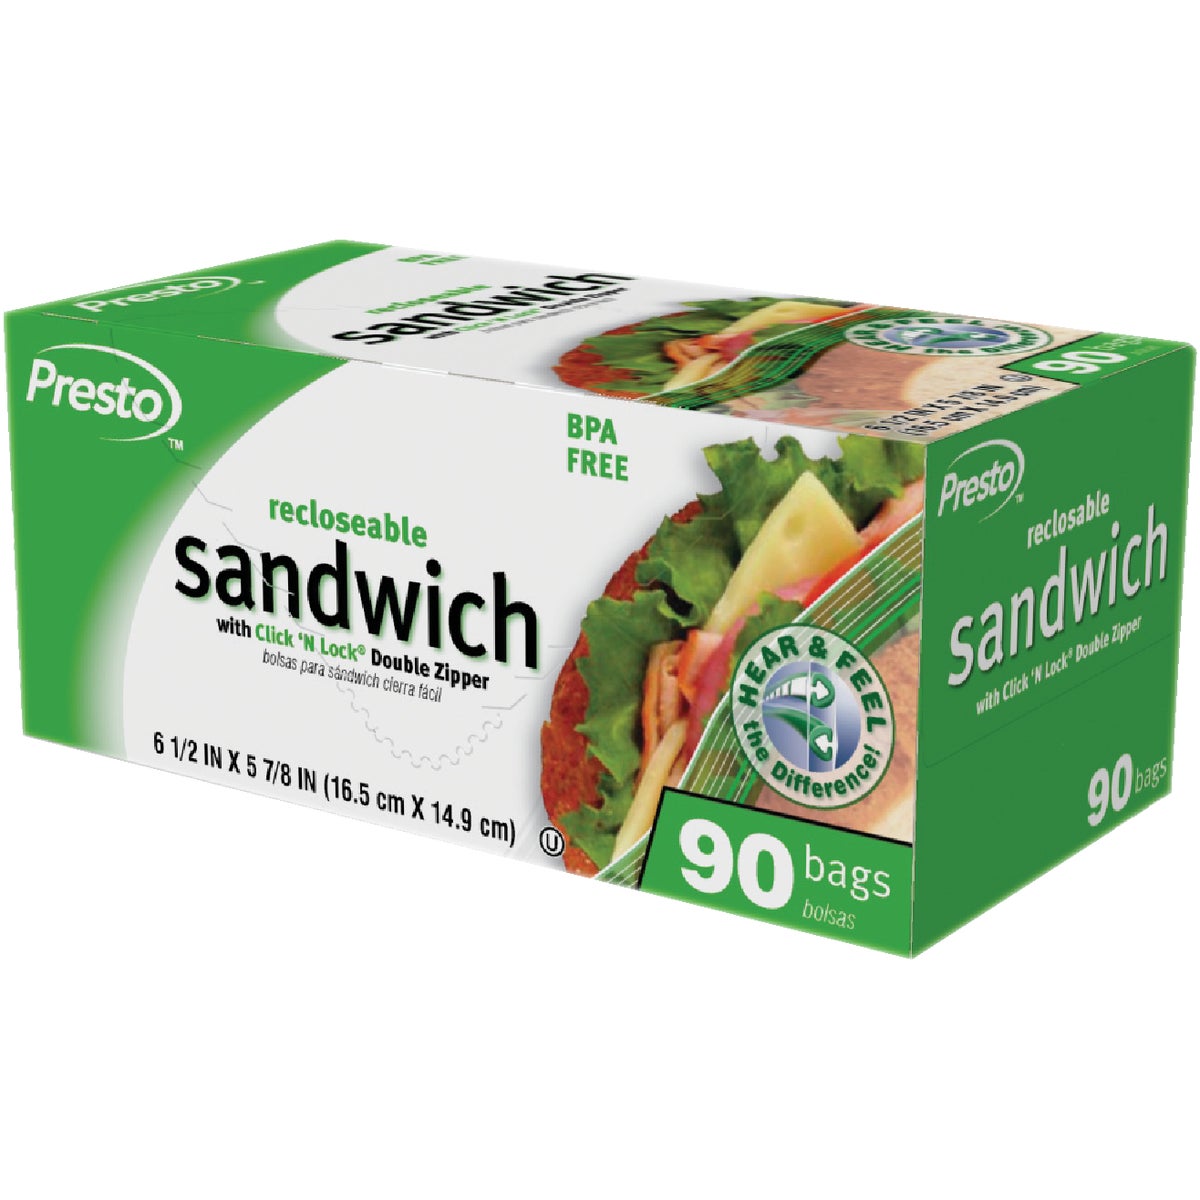 Presto Recloseable Sandwich Bag with Color Grip Opening (90-Count)